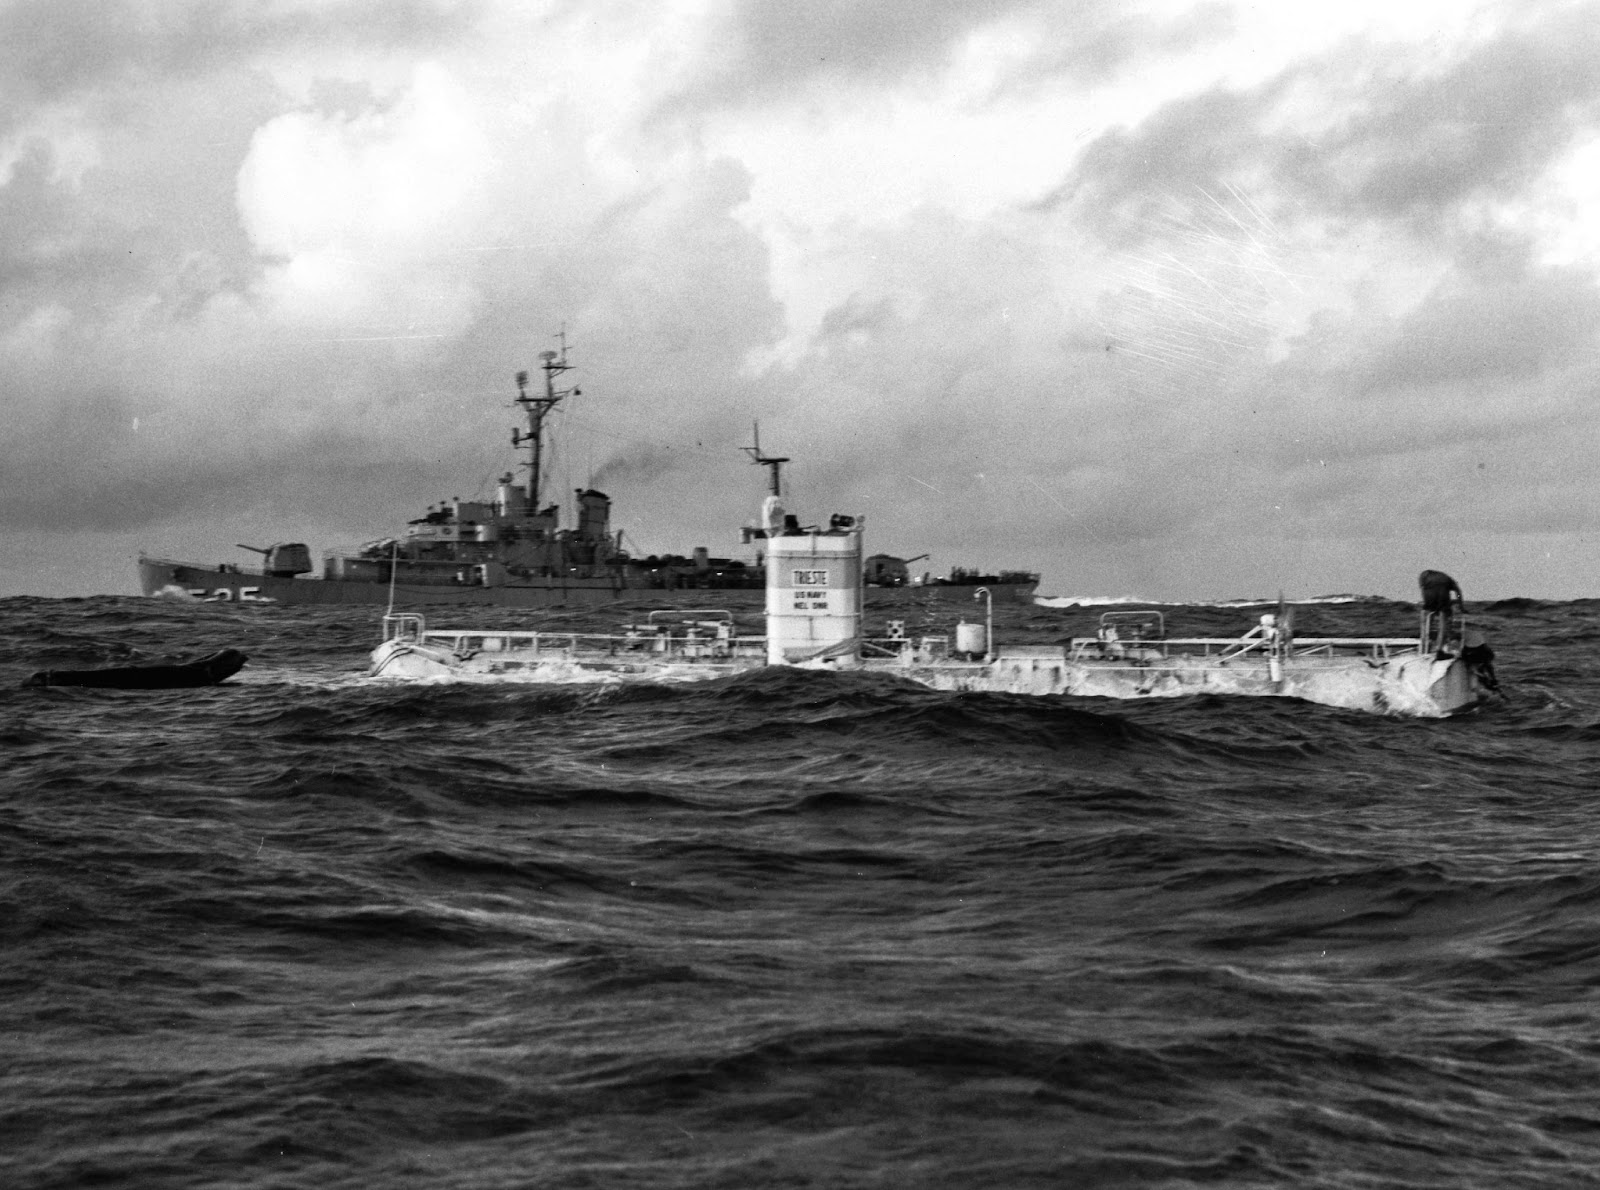 https://upload.wikimedia.org/wikipedia/commons/d/d3/Bathyscaphe_Trieste_with_USS_Lewis_%28DE-535%29_over_the_Marianas_Trench%2C_23_January_1960_%28NH_96797%29.jpg